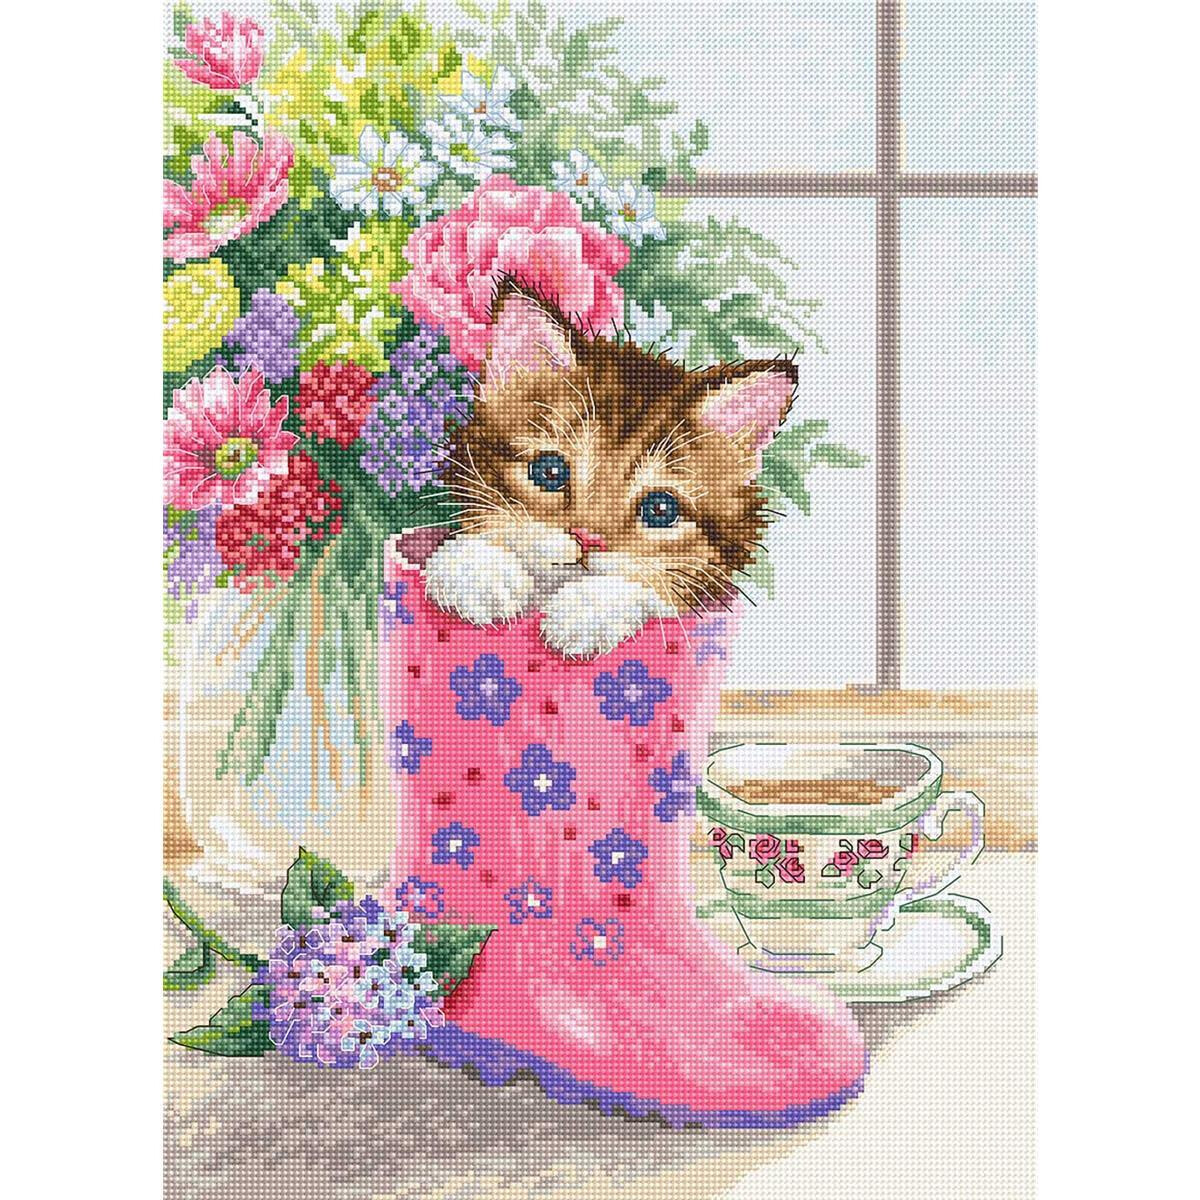 Luca-S counted cross stitch kit "Pretty...